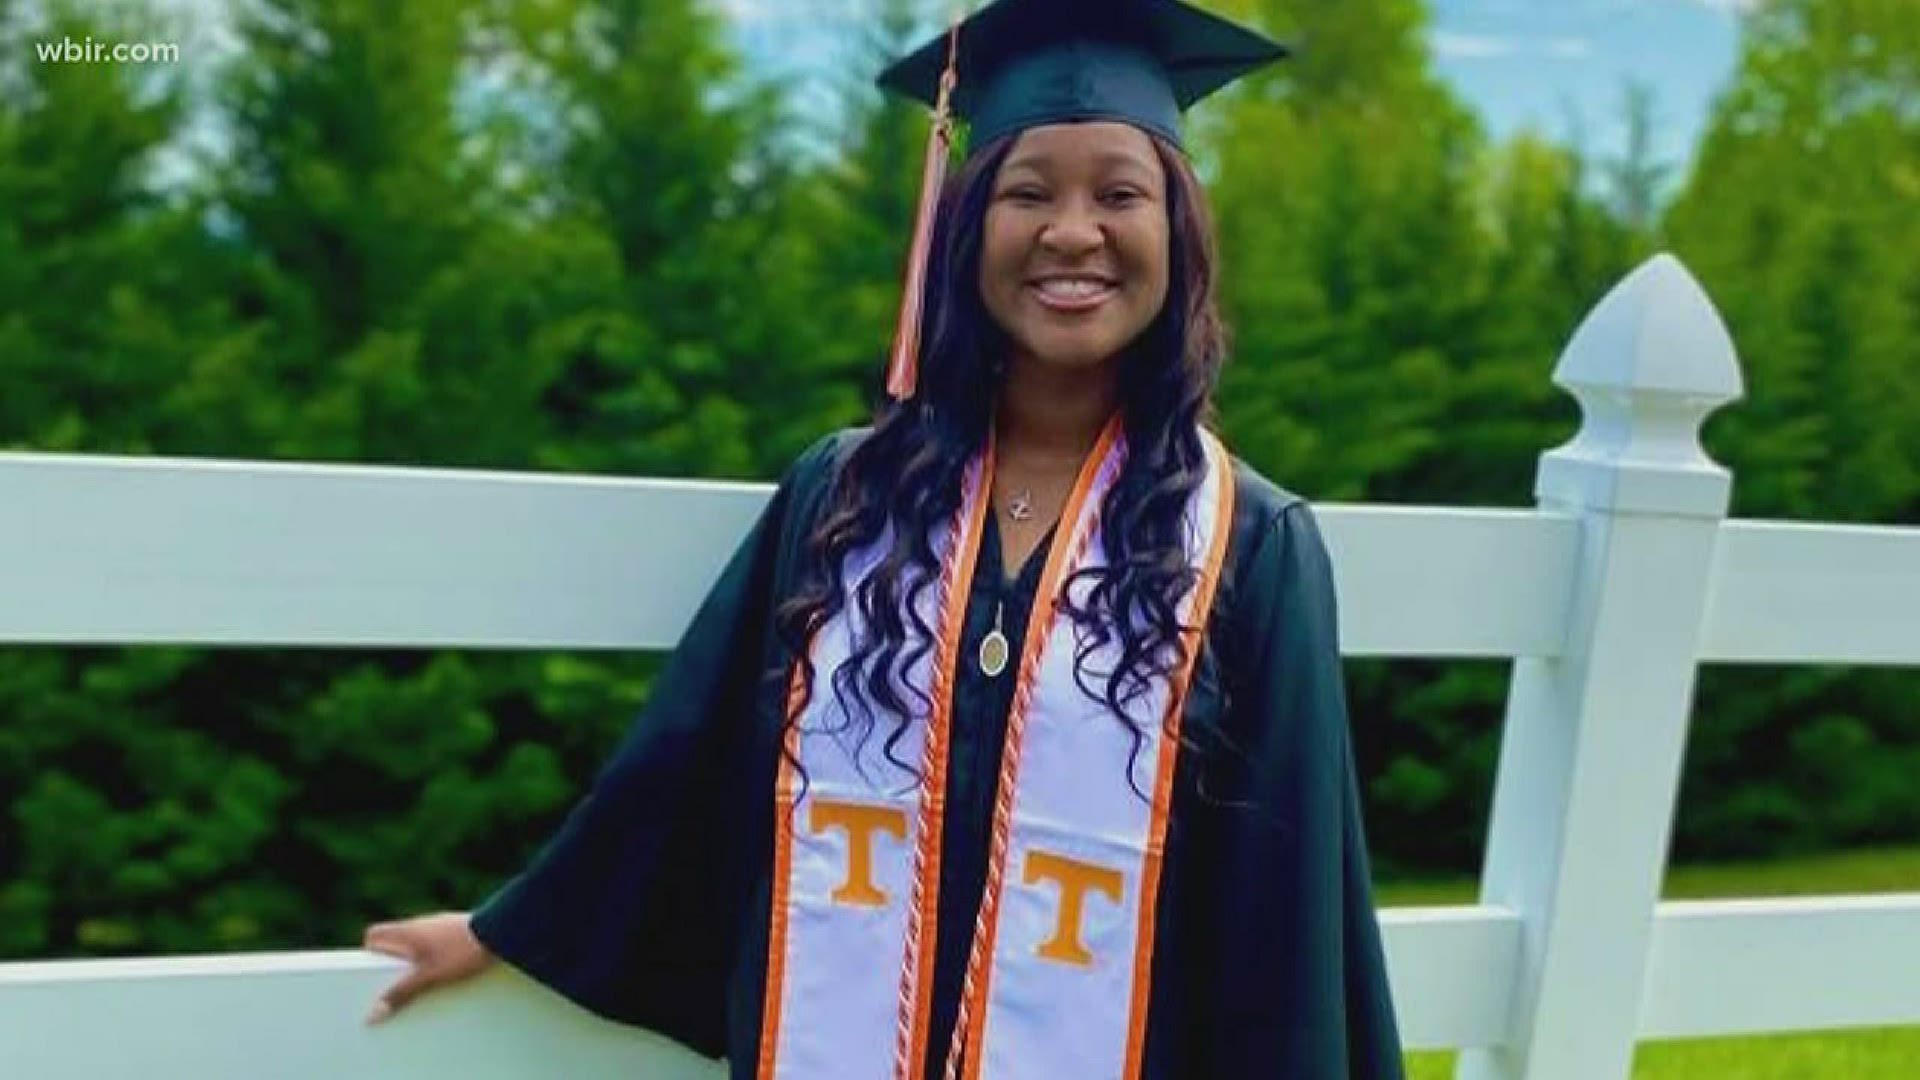 Uriah Richey is the first in her family to graduate from college. She is also a Zaevion Dobson Memorial Scholarship recipient. Two things she's proud to be.